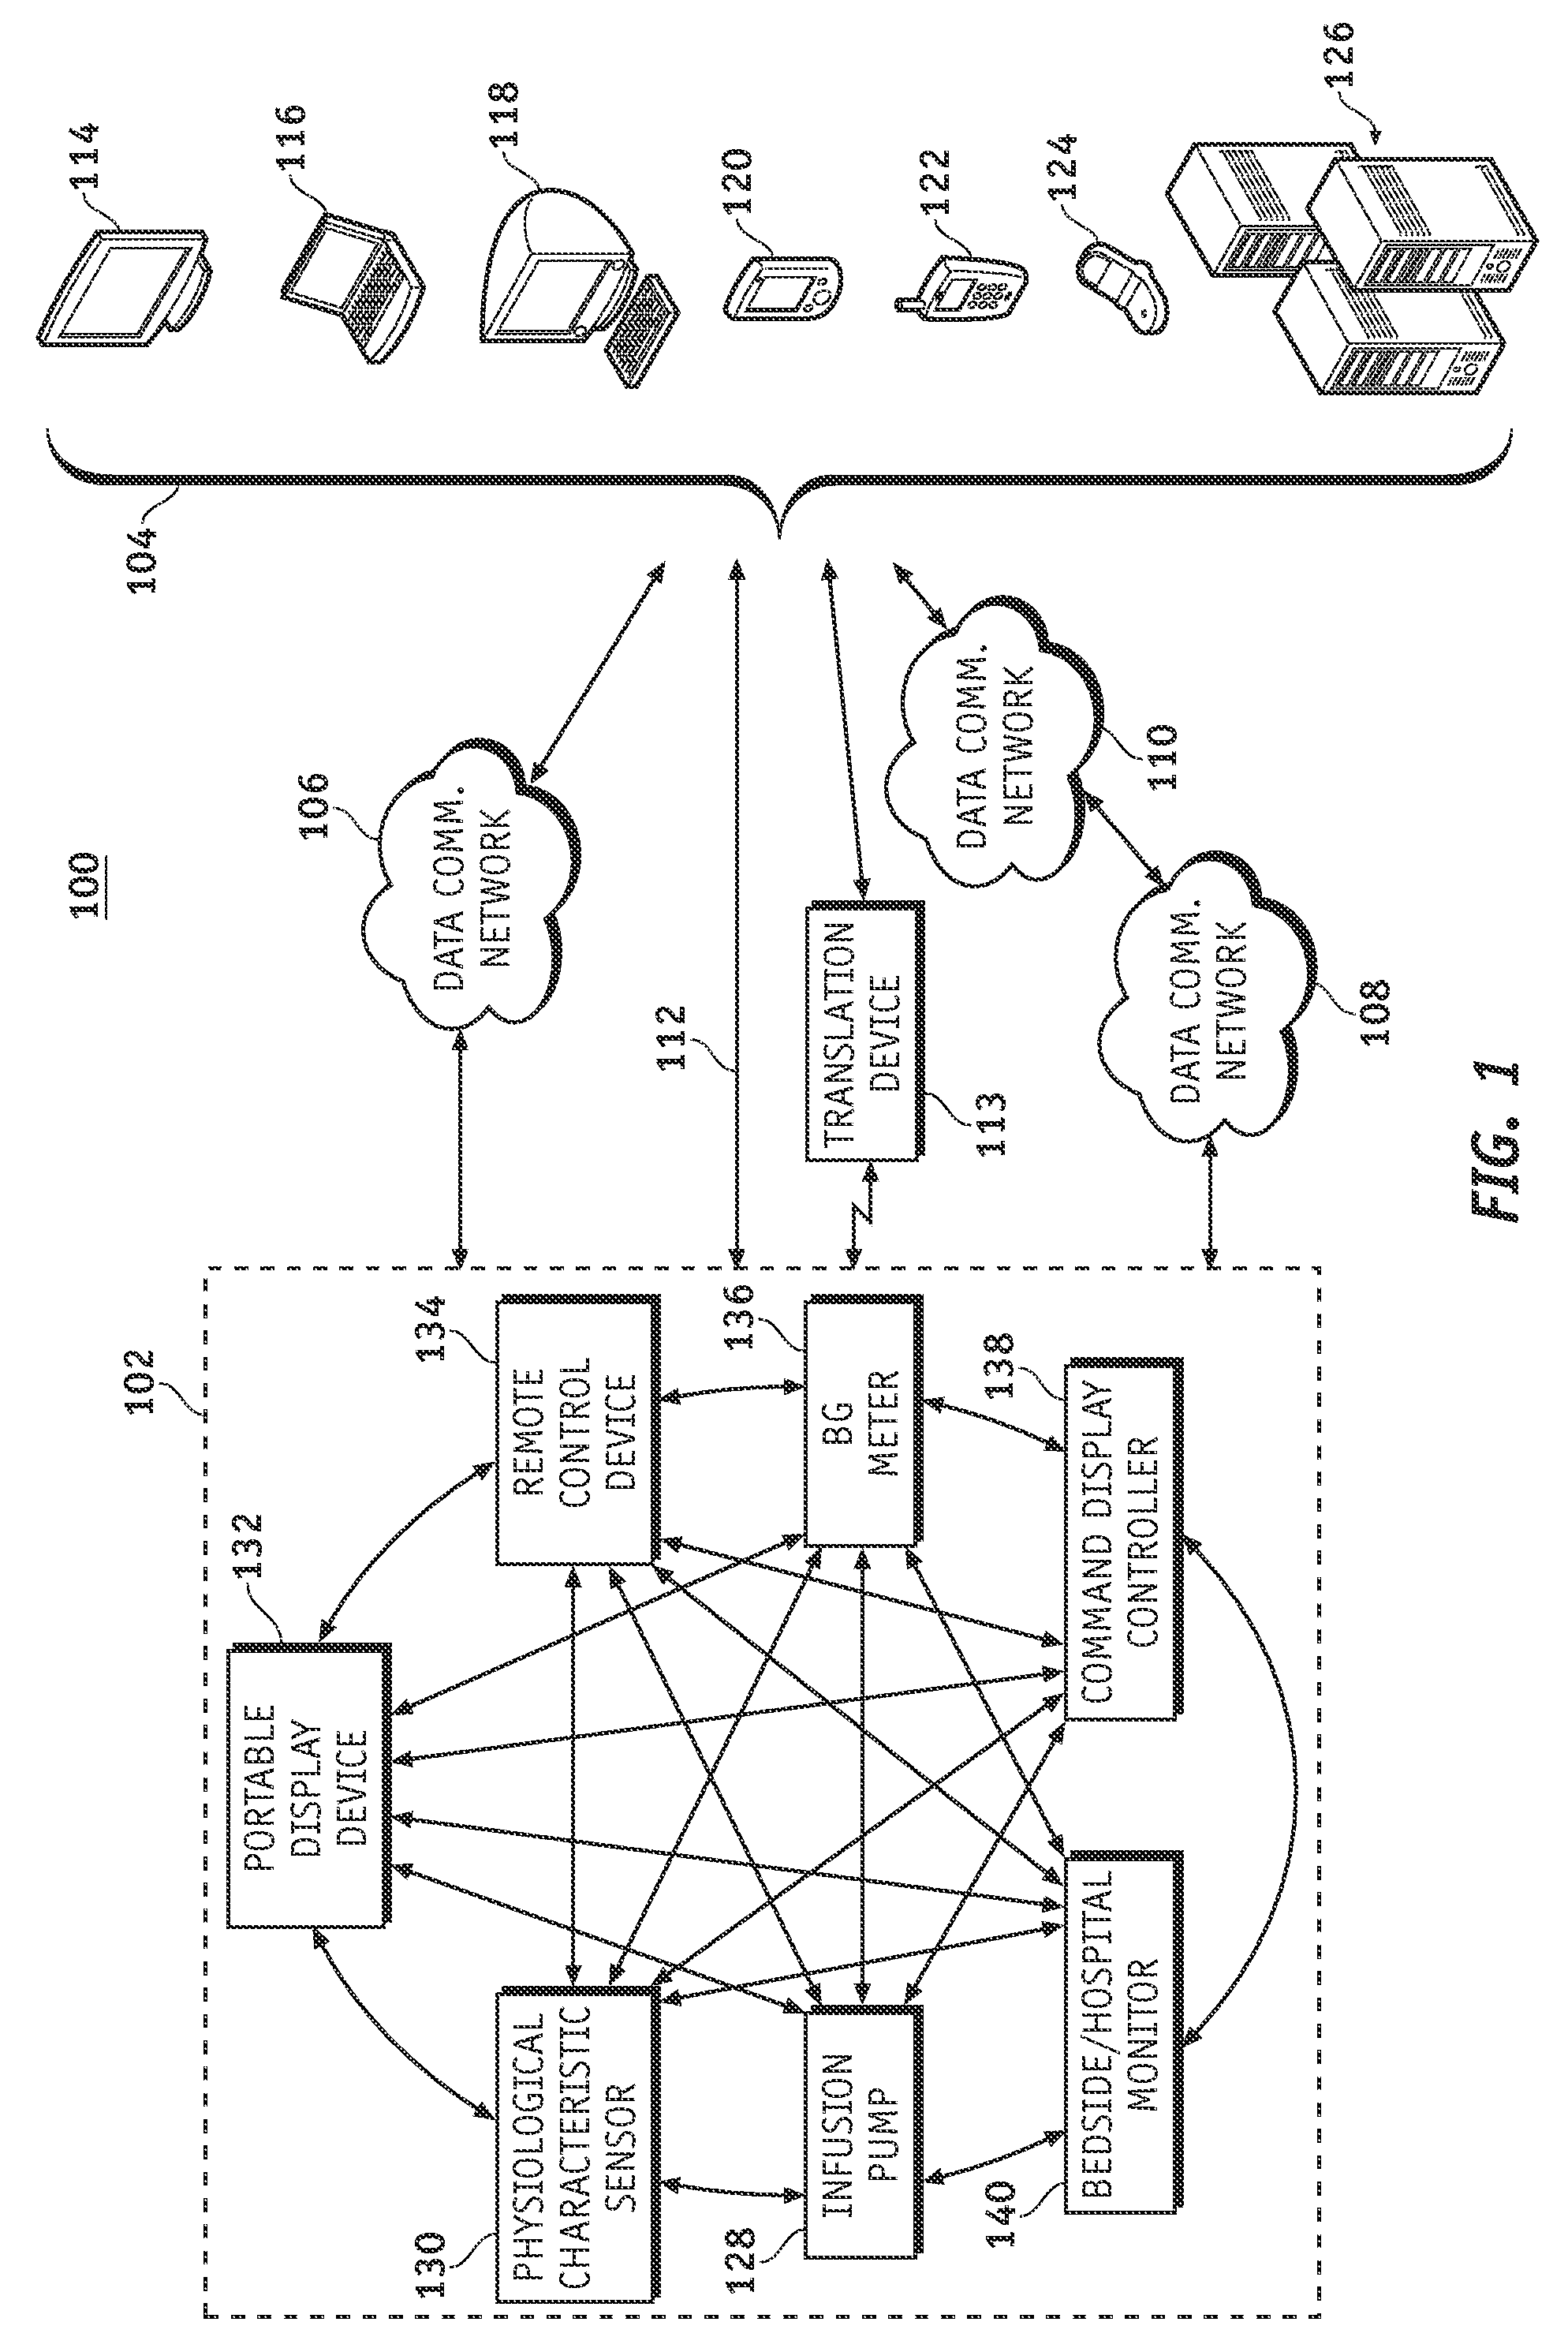 Subnetwork synchronization and variable transmit synchronization techniques for a wireless medical device network